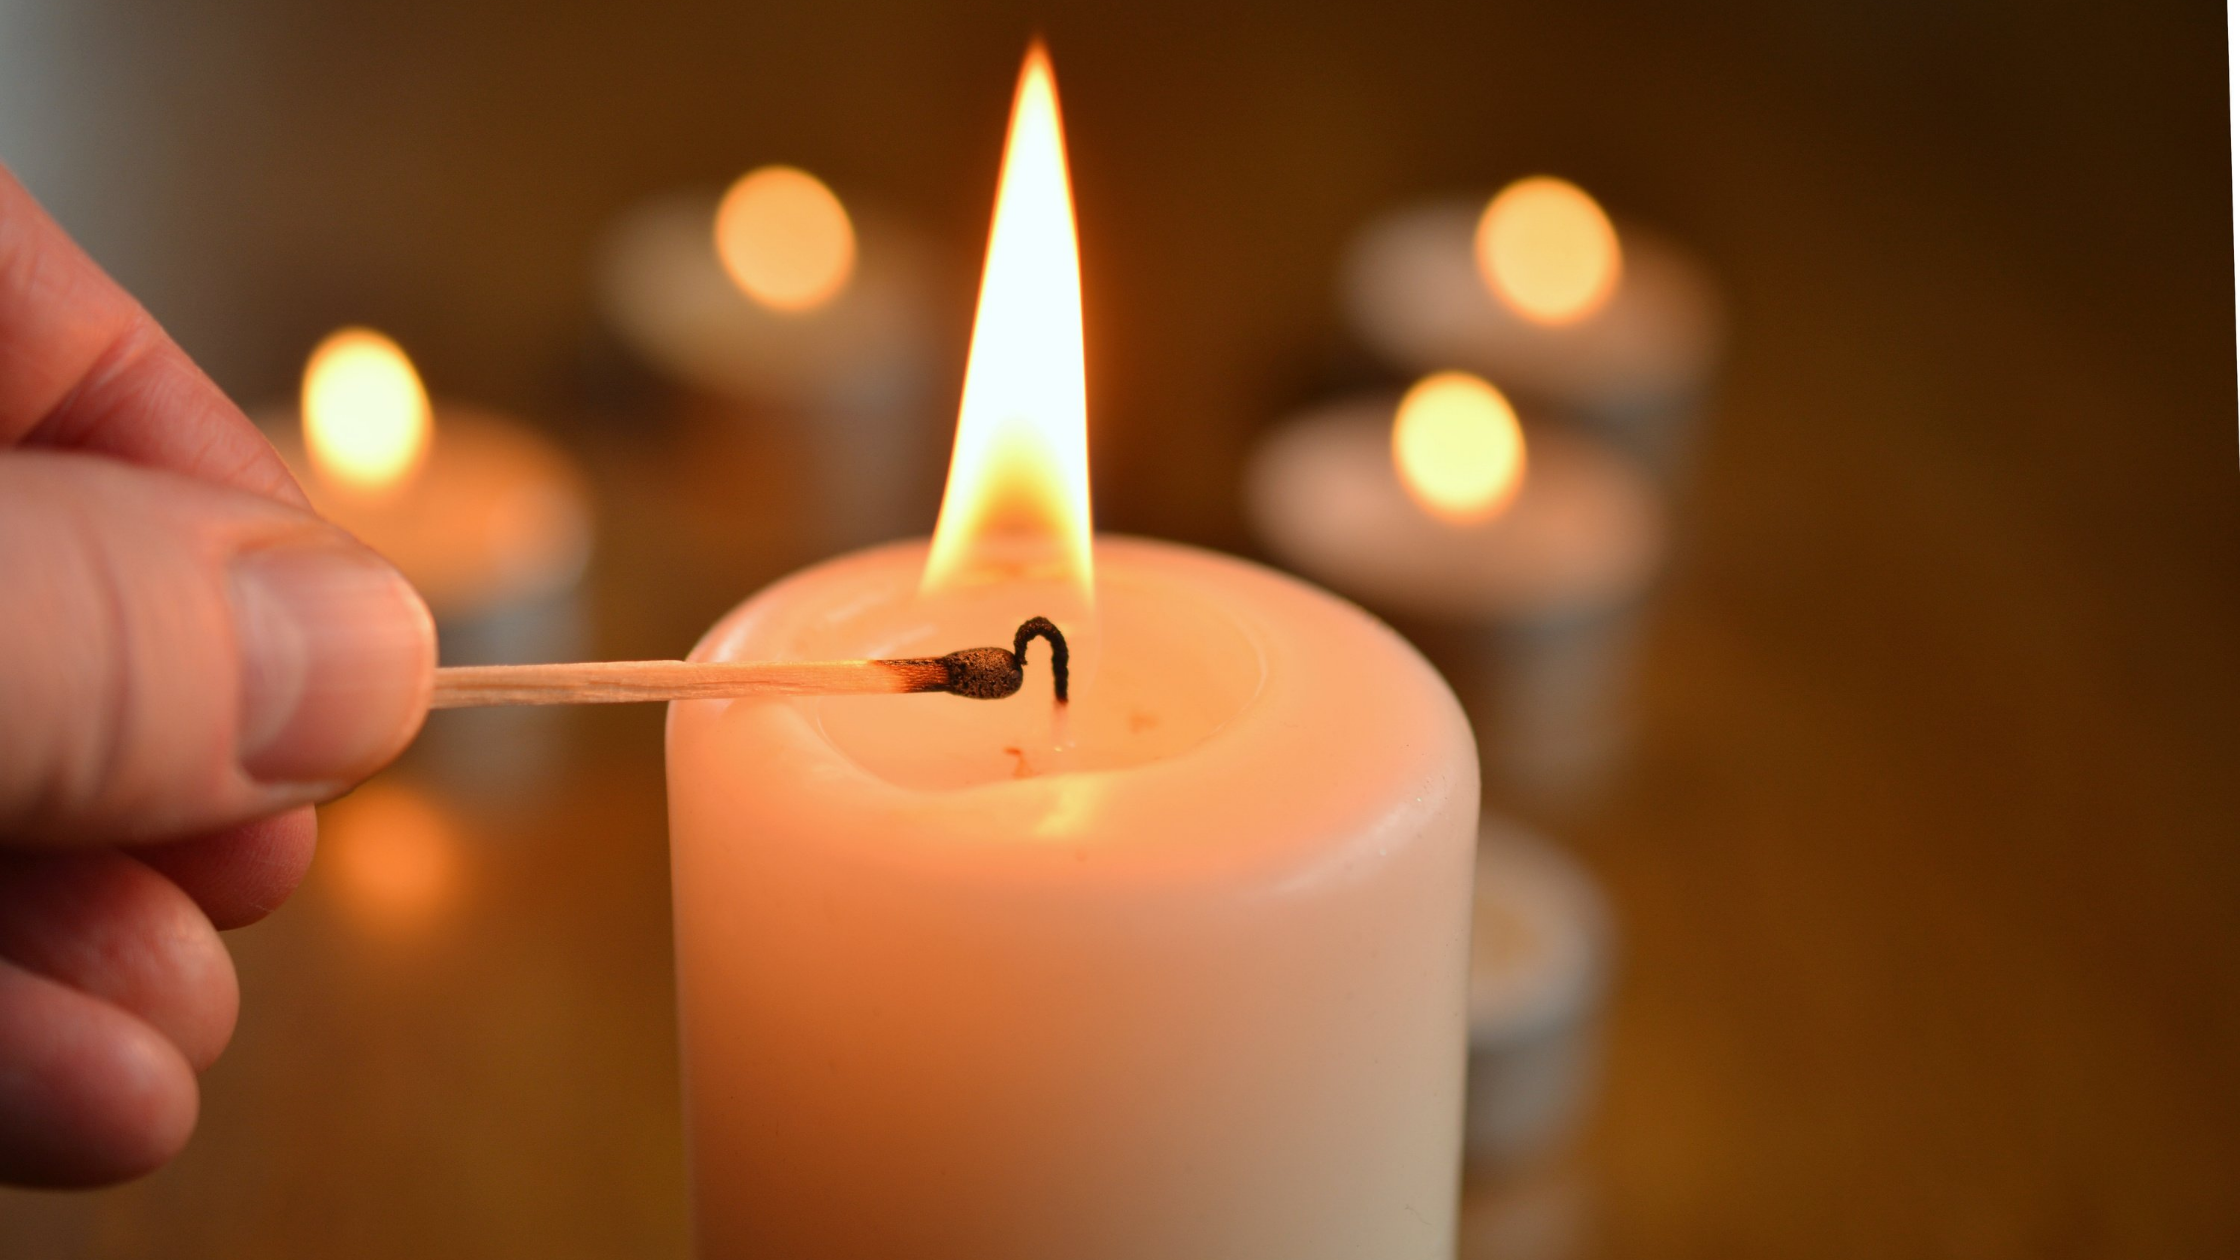 lighting a candle for advent